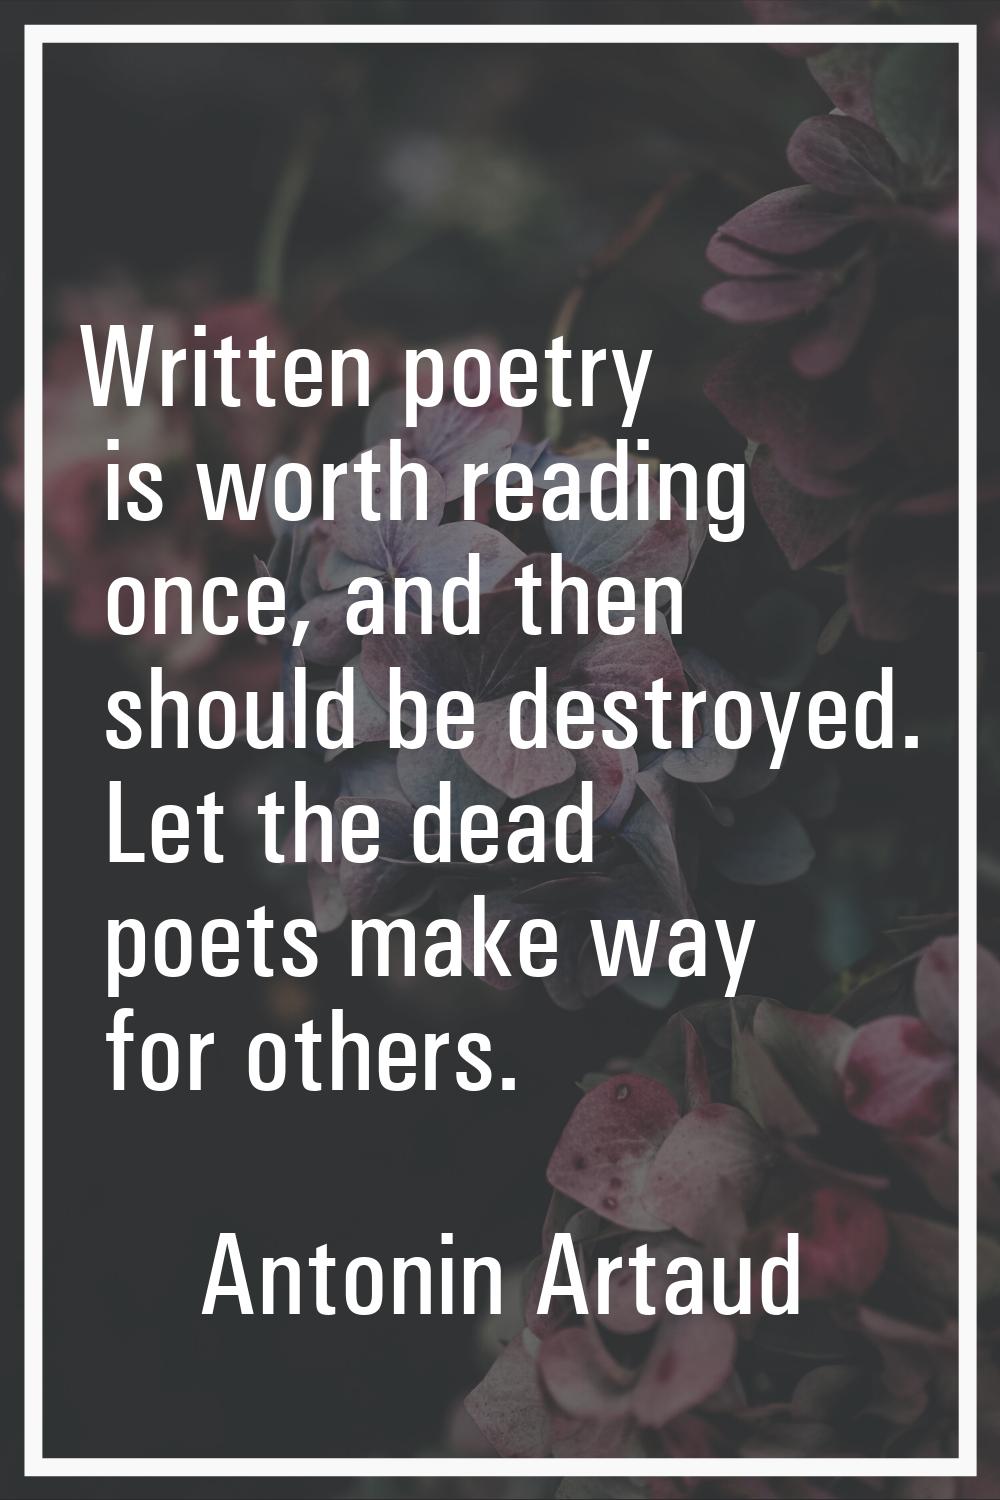 Written poetry is worth reading once, and then should be destroyed. Let the dead poets make way for